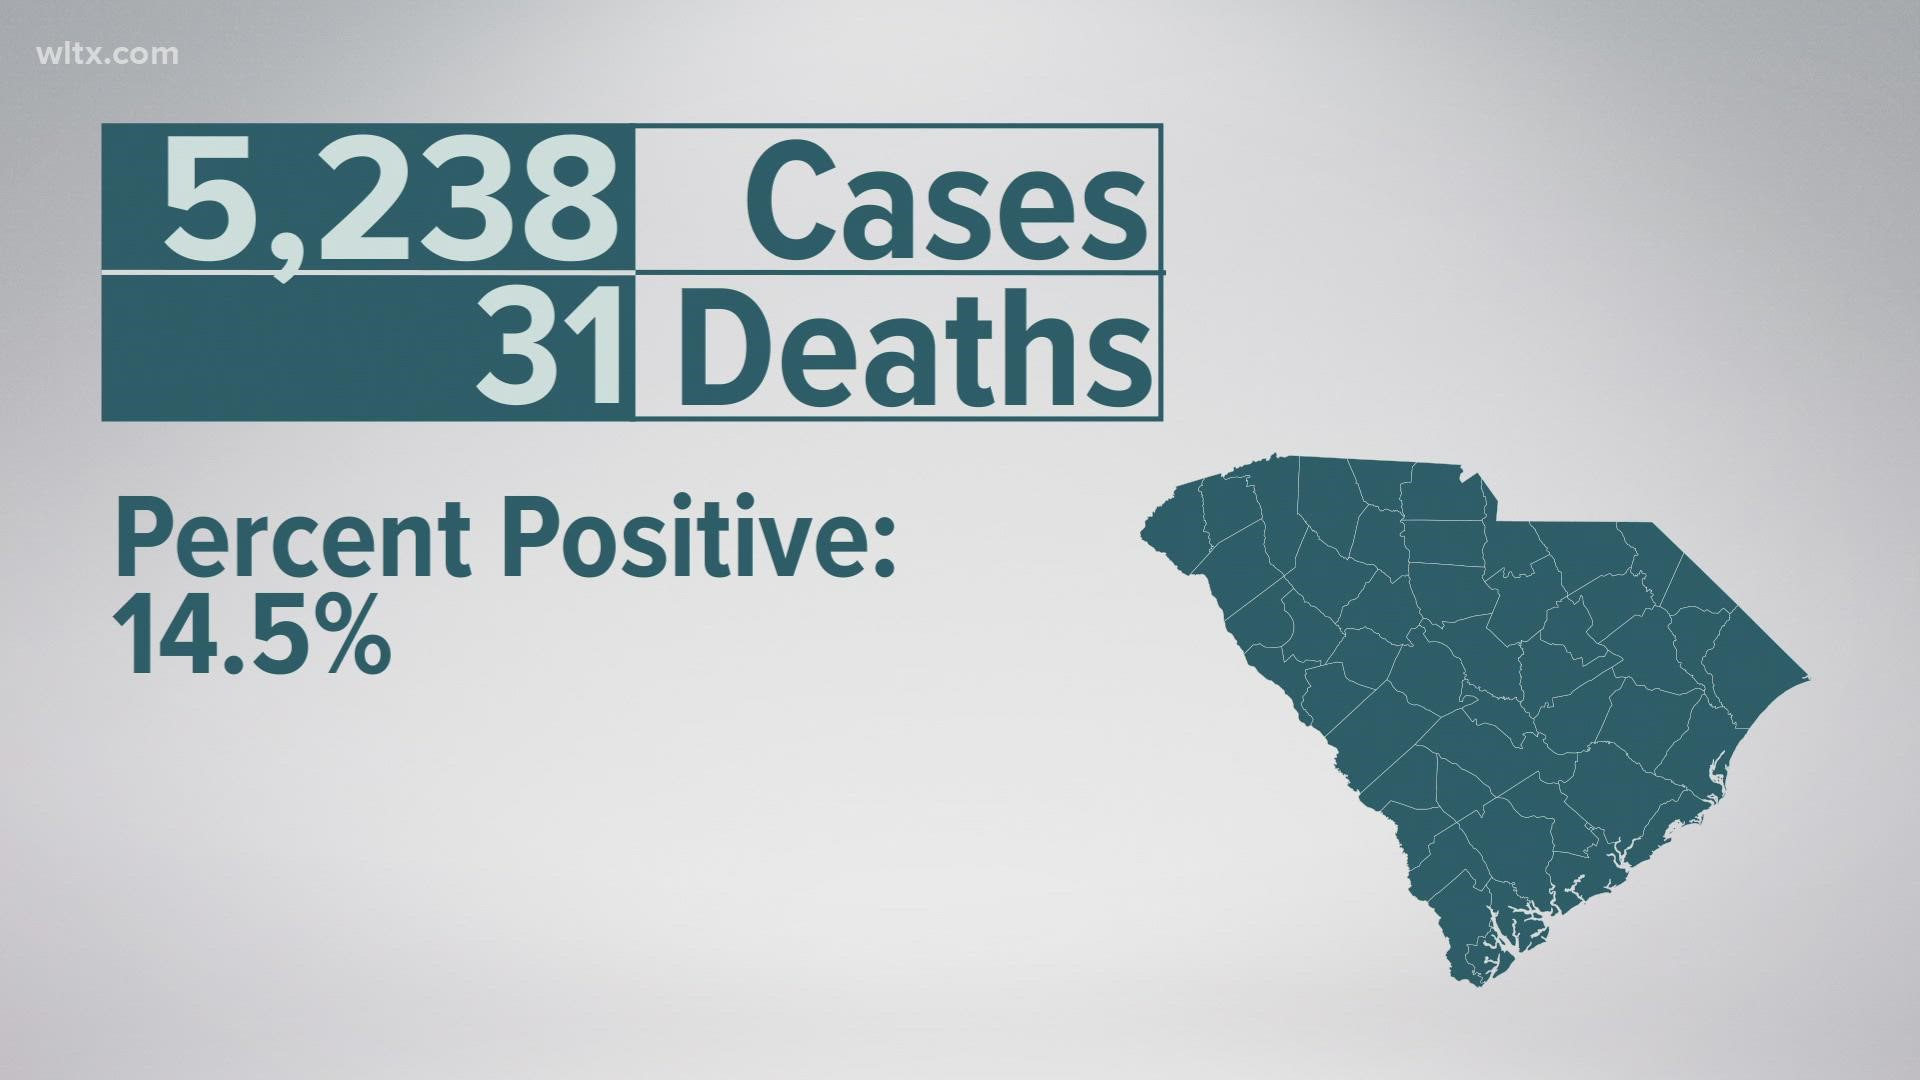 SC exceeded 5,000 daily COVID cases in the latest data, the first time the state's seen a number that high since the worst depths of the pandemic in mid-January.